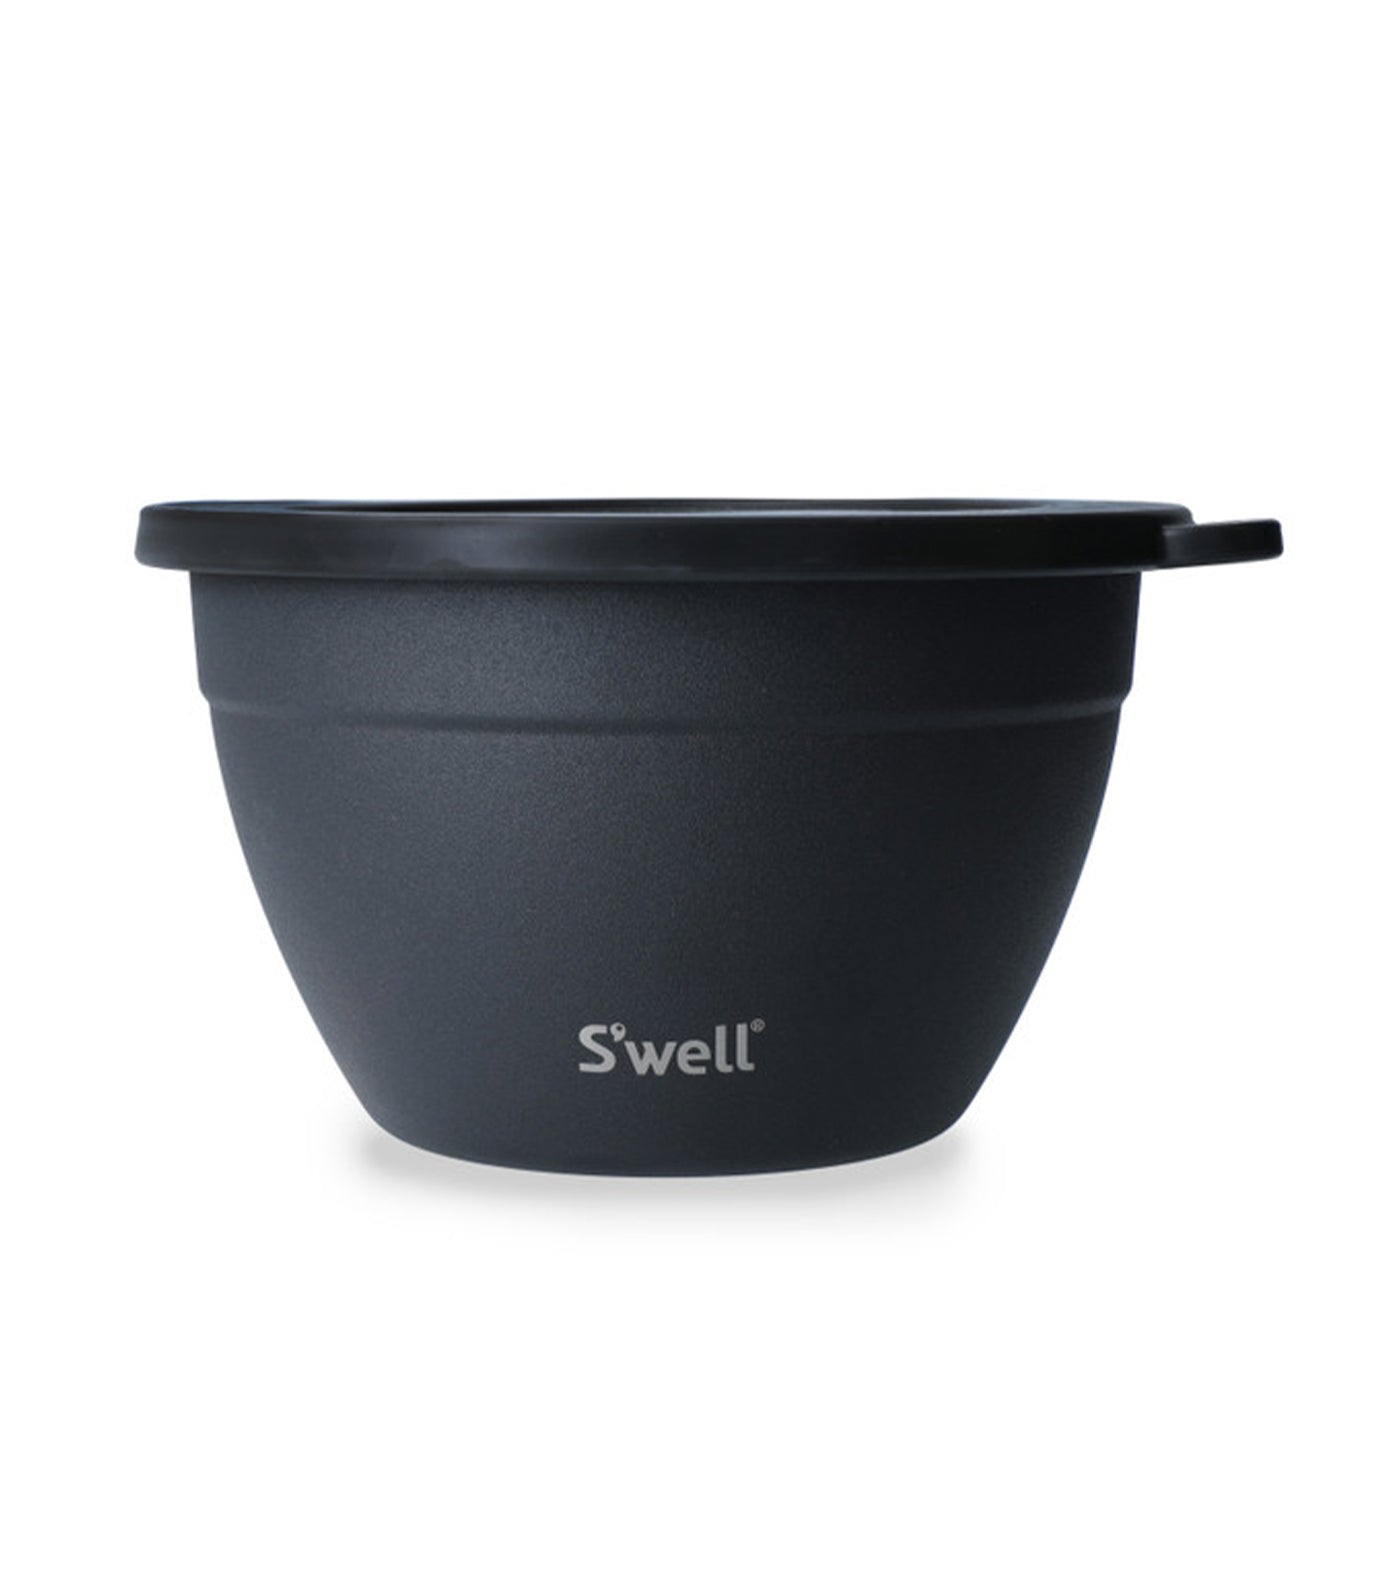 S'well Stainless Steel Salad Bowl Kit